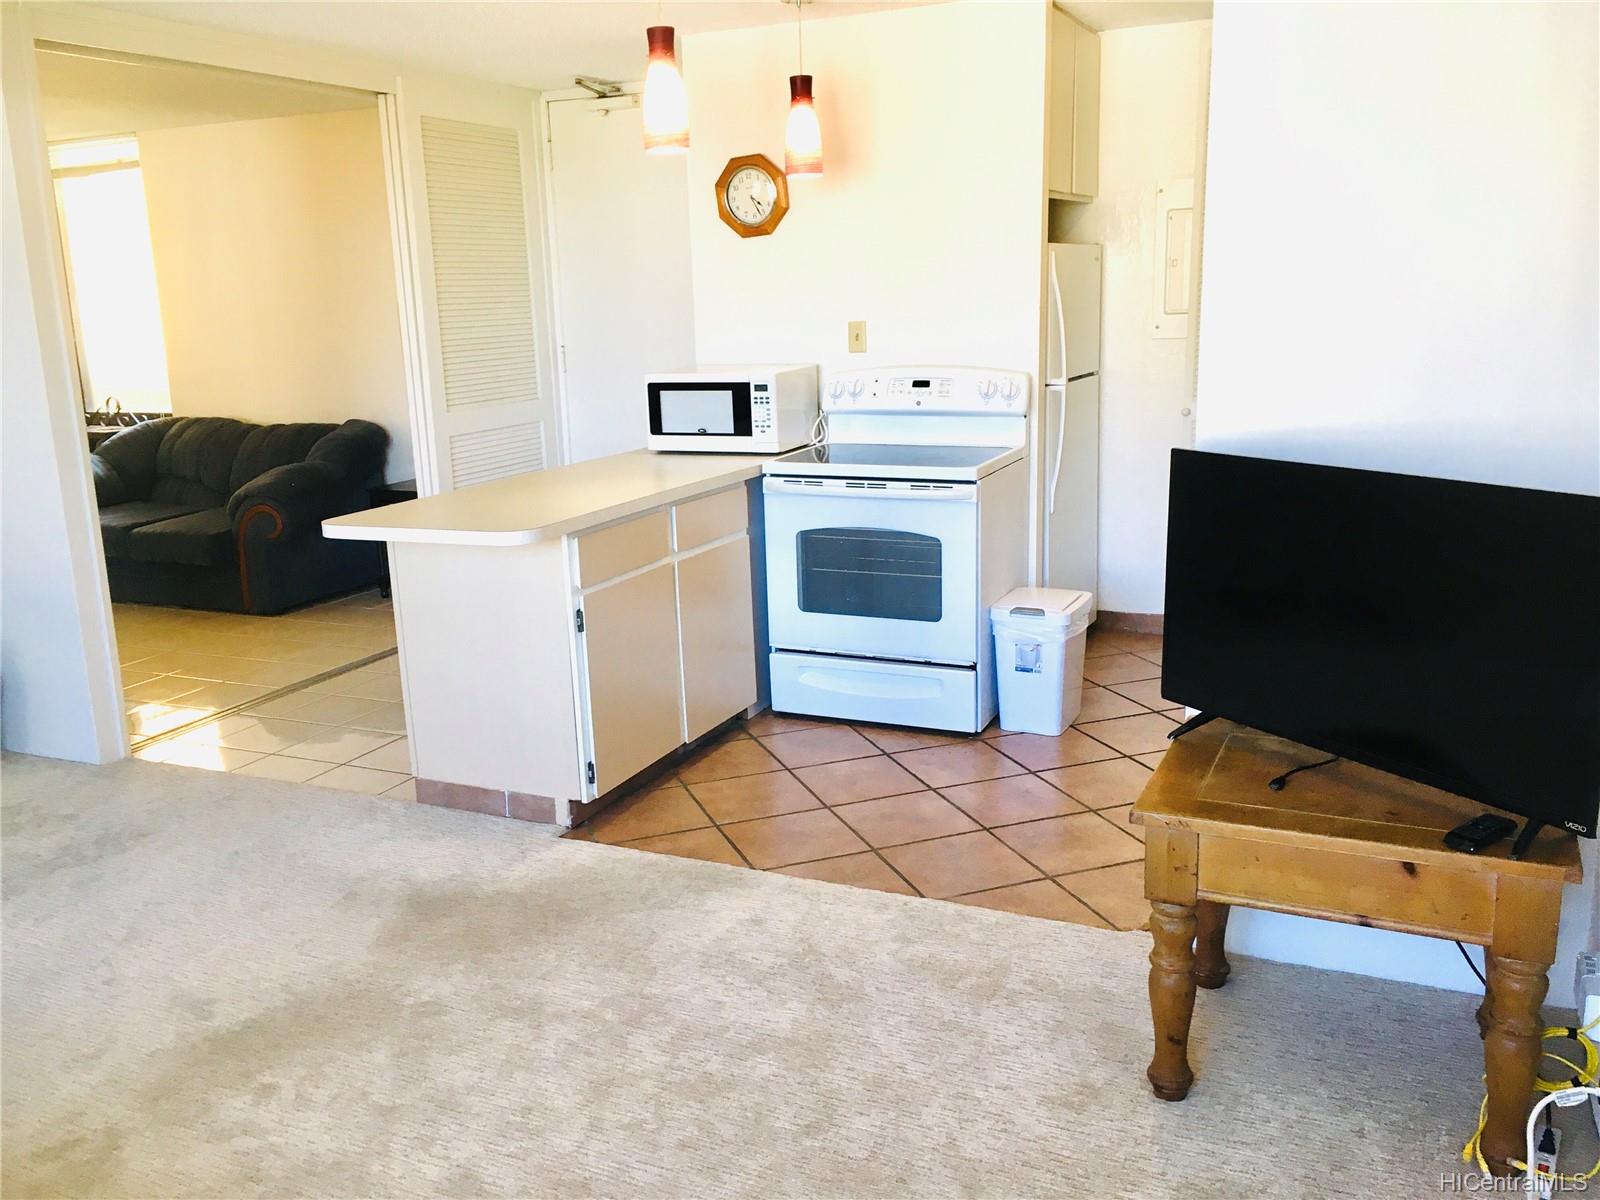 a living room with washer and a flat screen tv